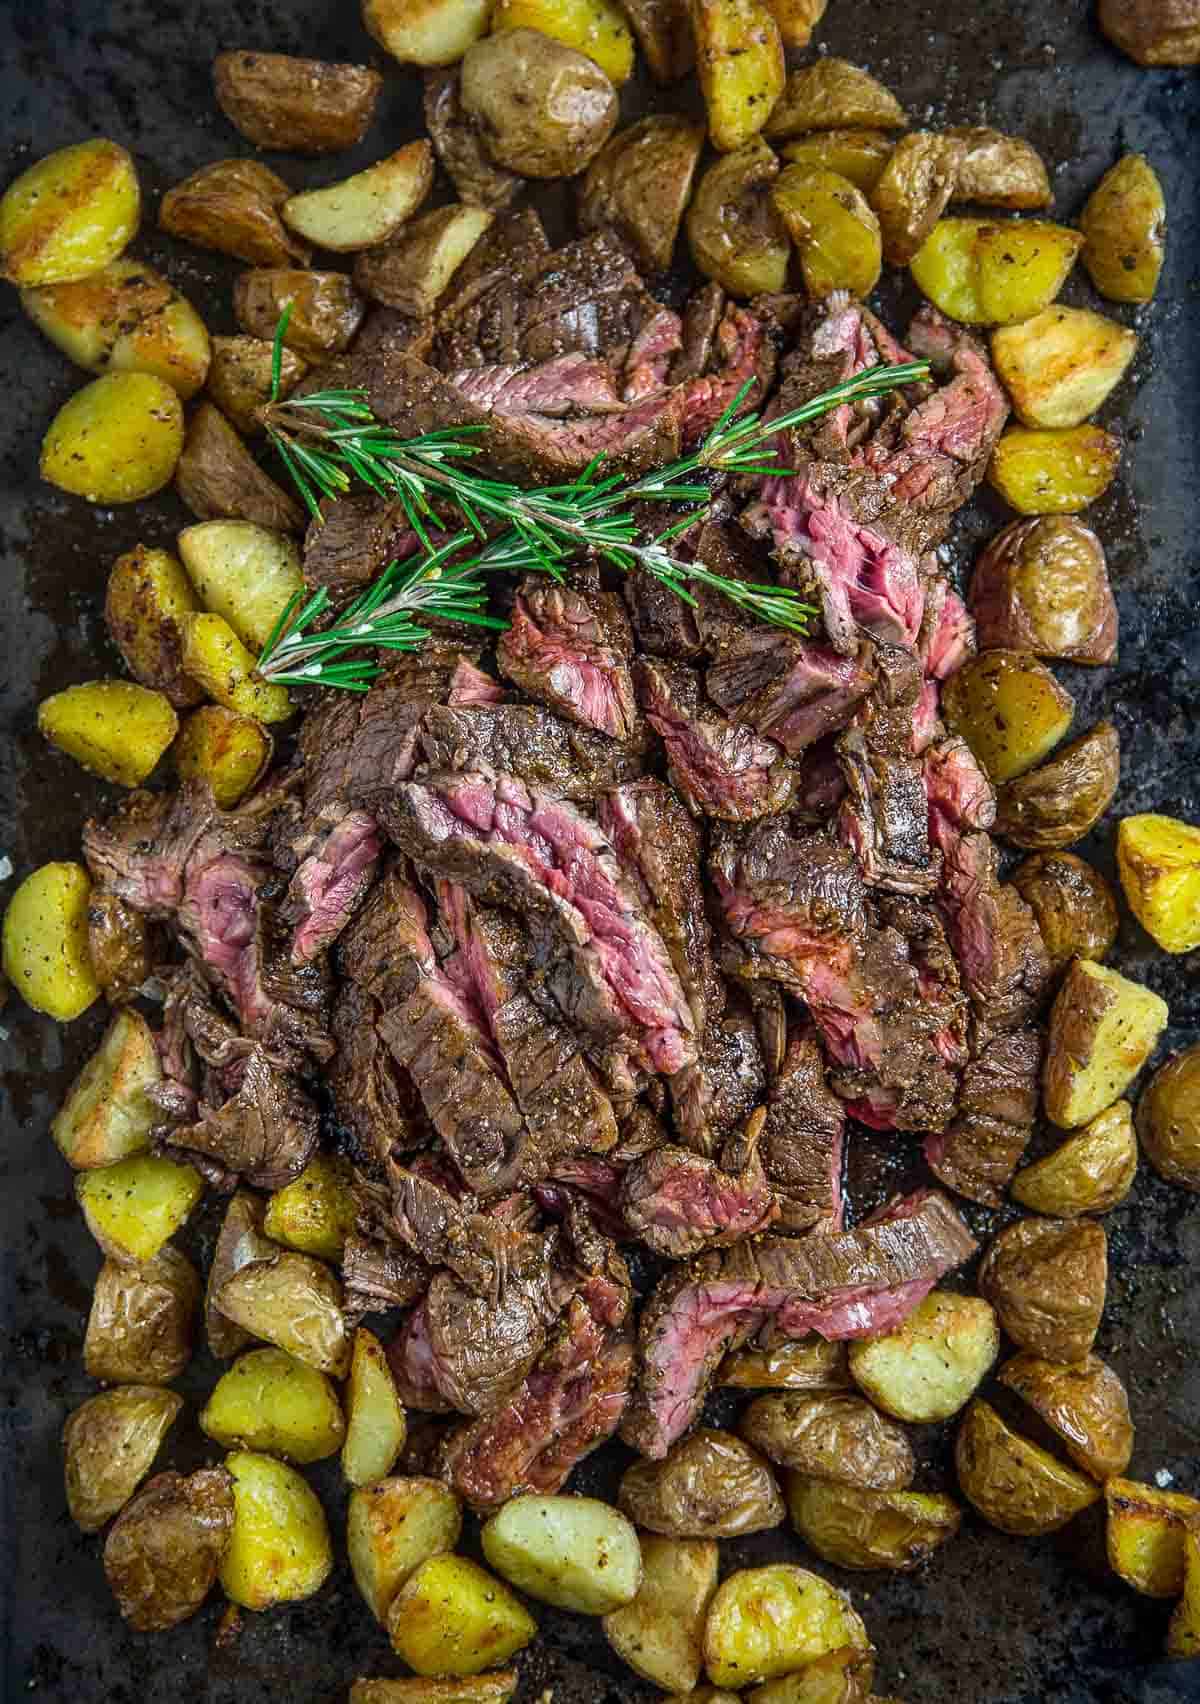 Grilled Skirt steak cooked to medium rare served over roasted potatoes.